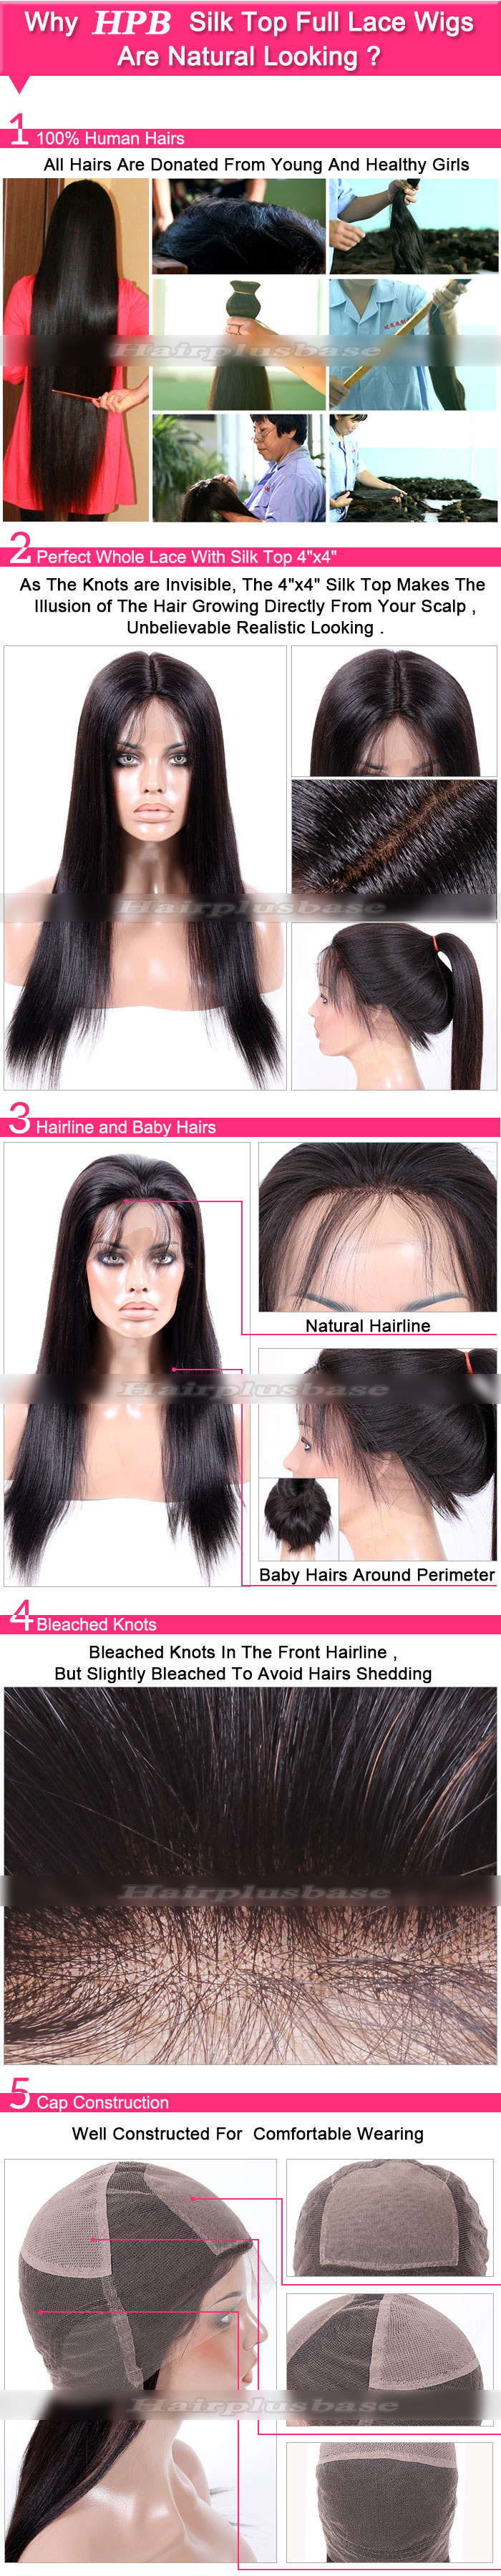 Why Silk Top Full lace wigs natural looking 